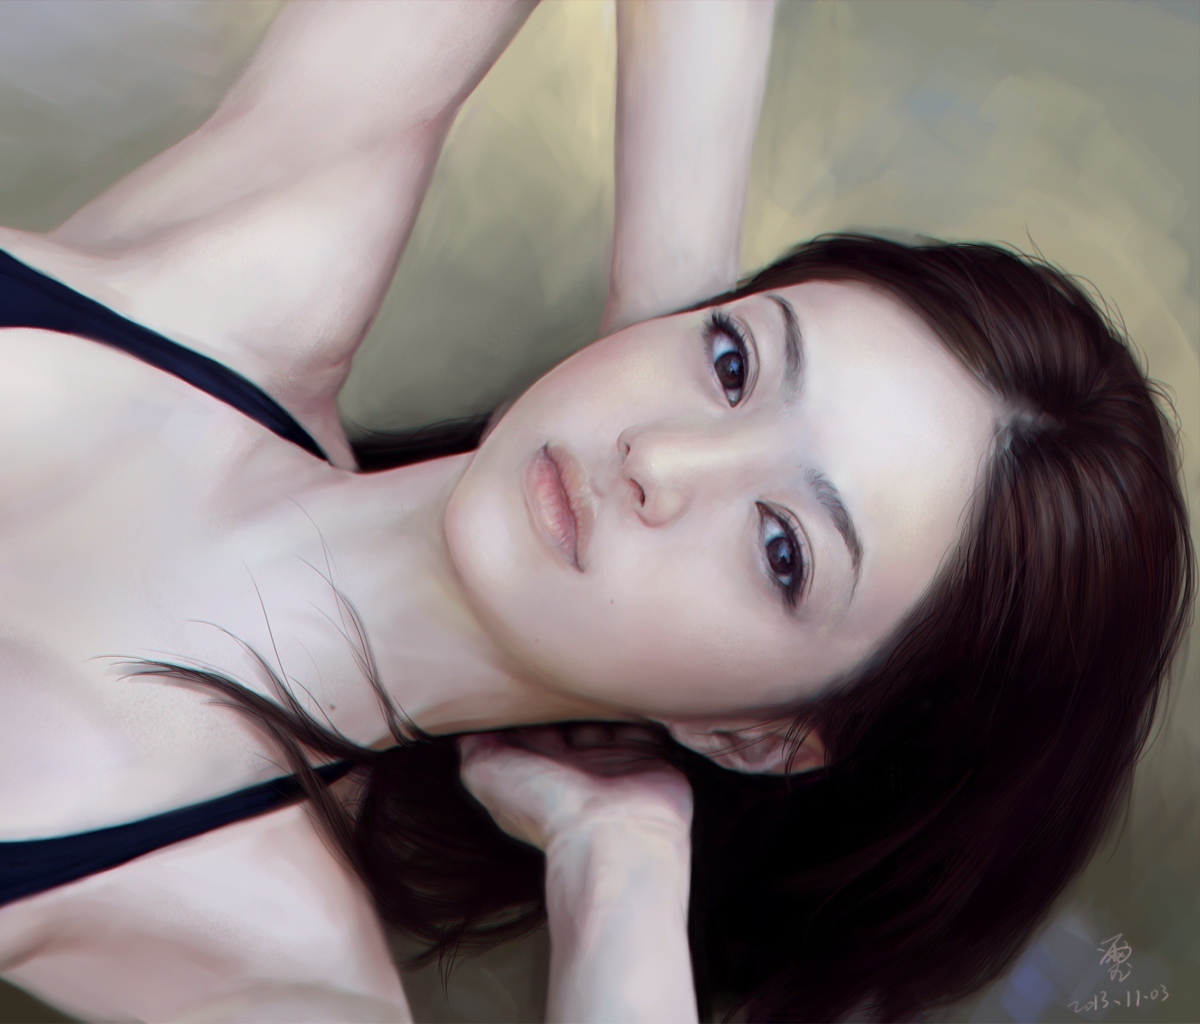 Das Girl's Face Realistic Painting Wallpaper 1200x1024